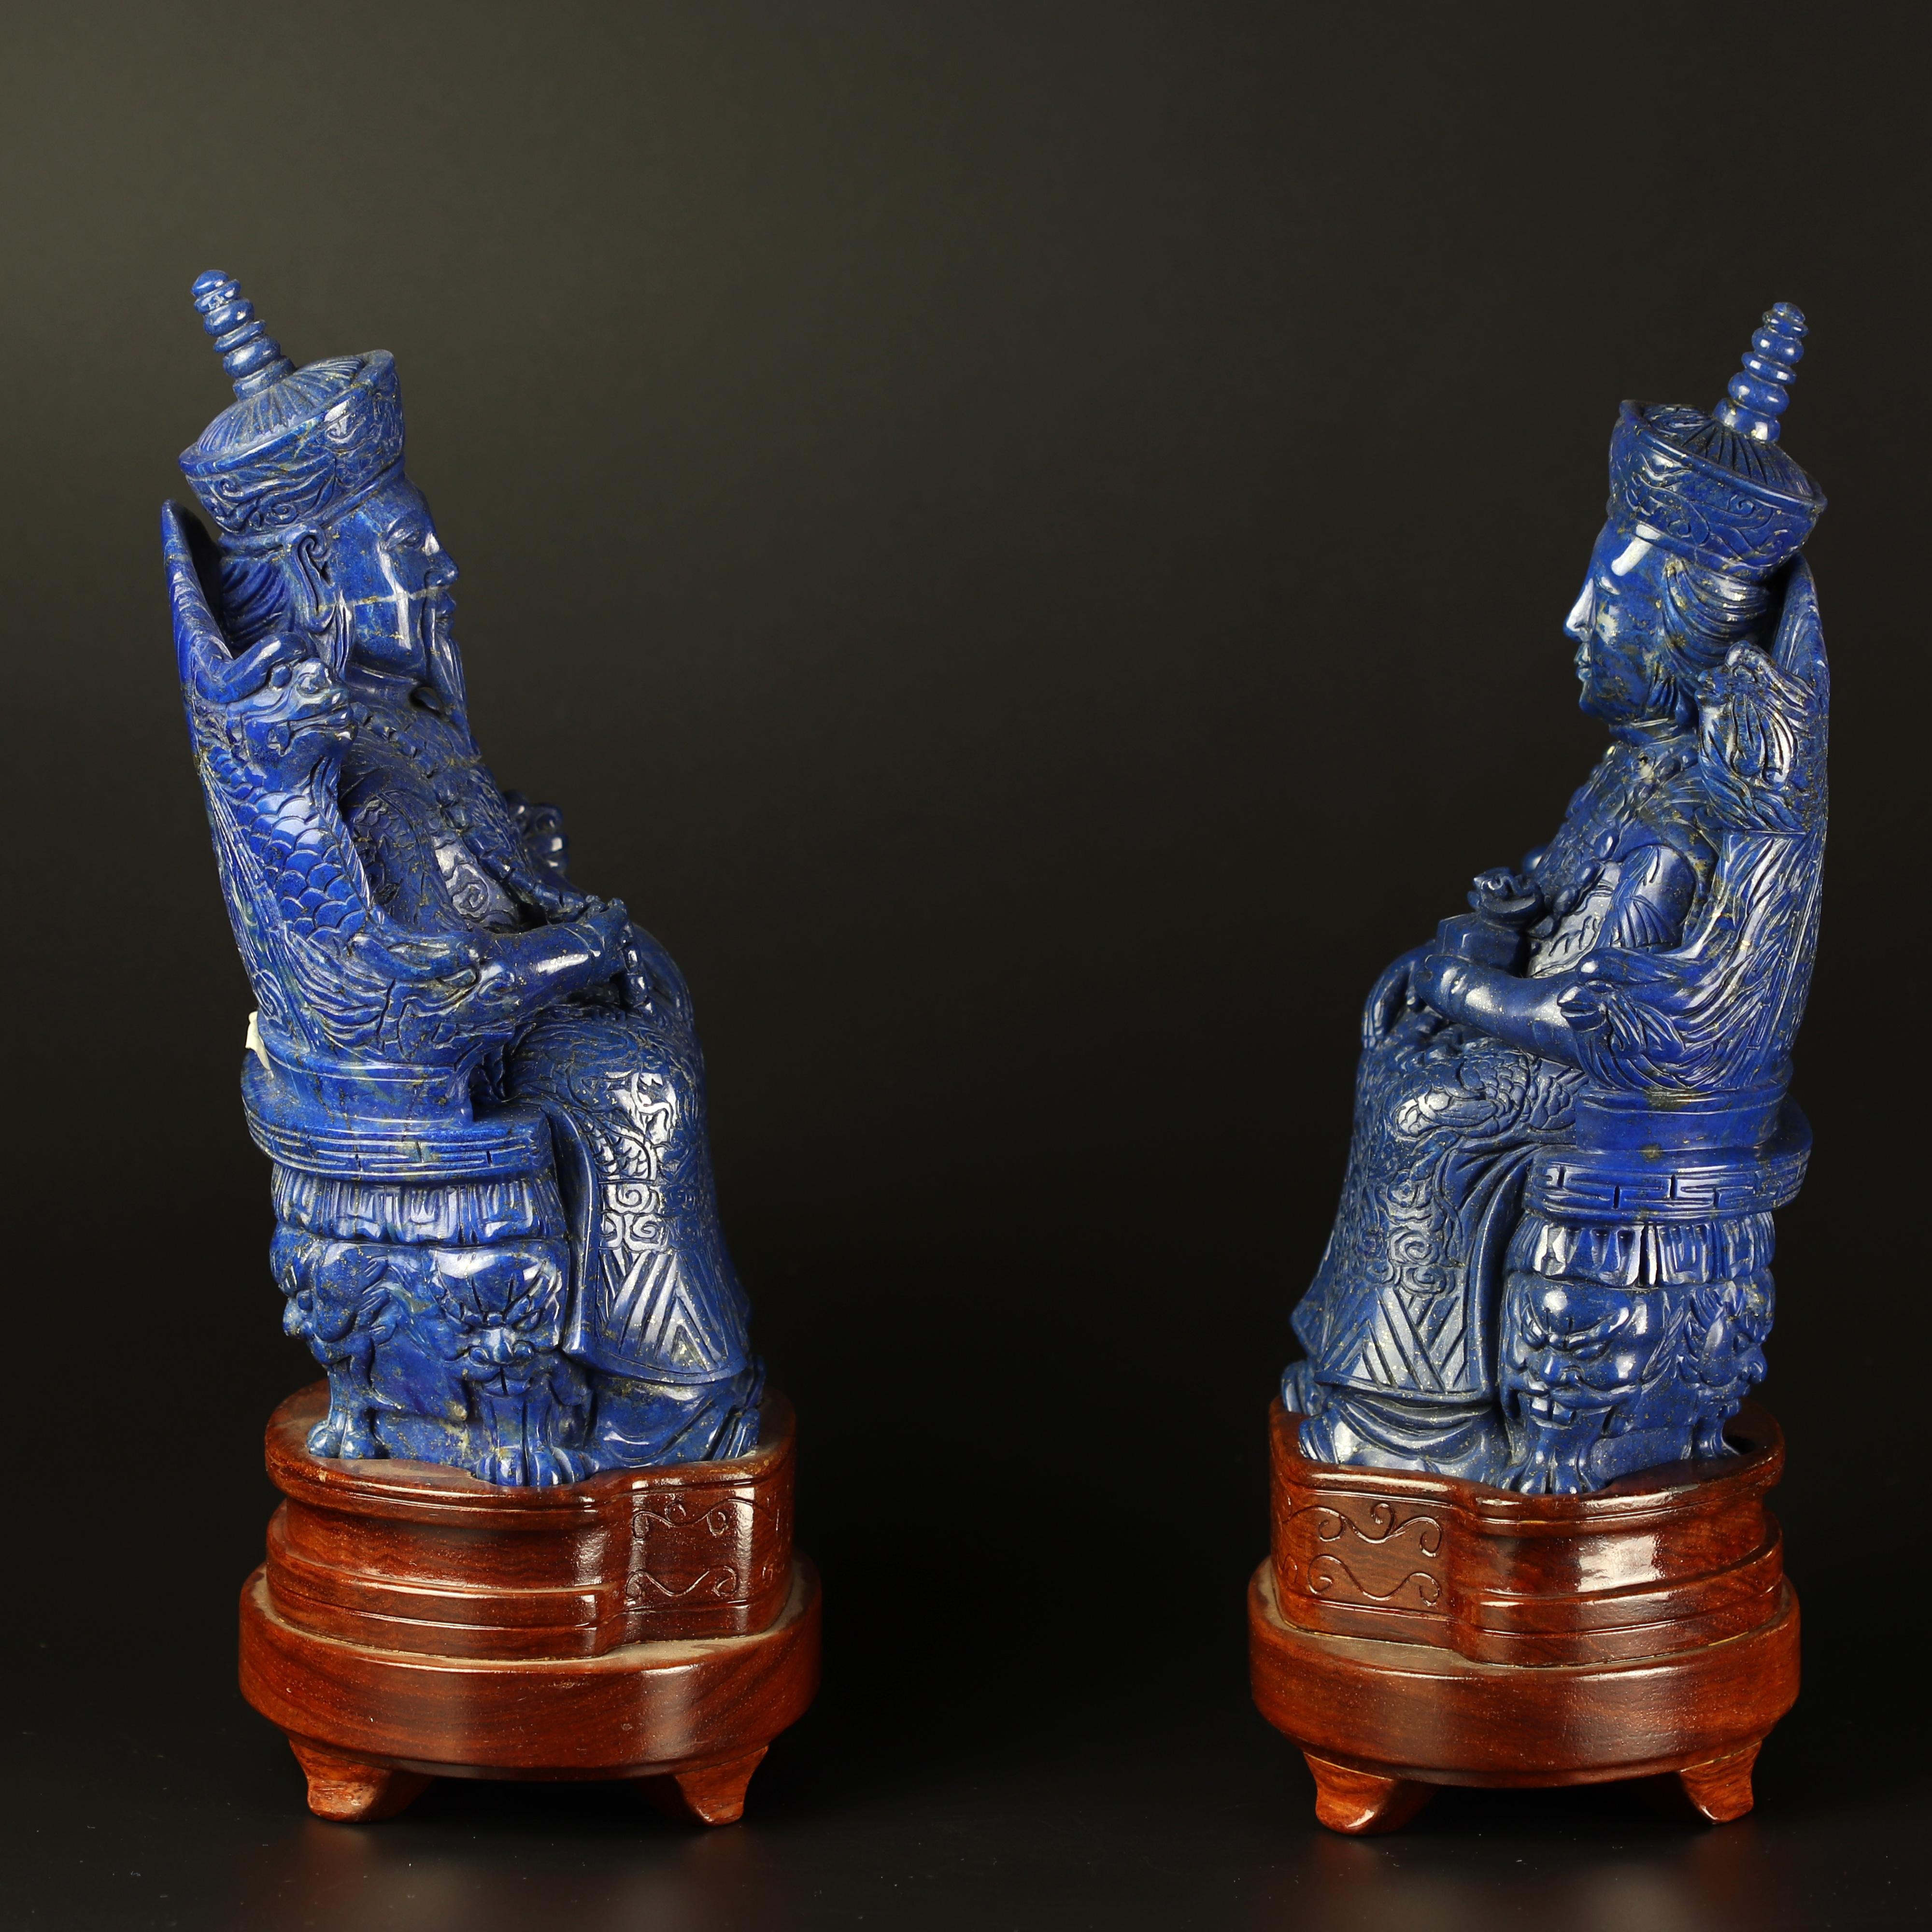 Chinese Export Lapis Lazuli King Queen Carved Blue Gemstone Artisanal Royalty Statue Sculpture For Sale